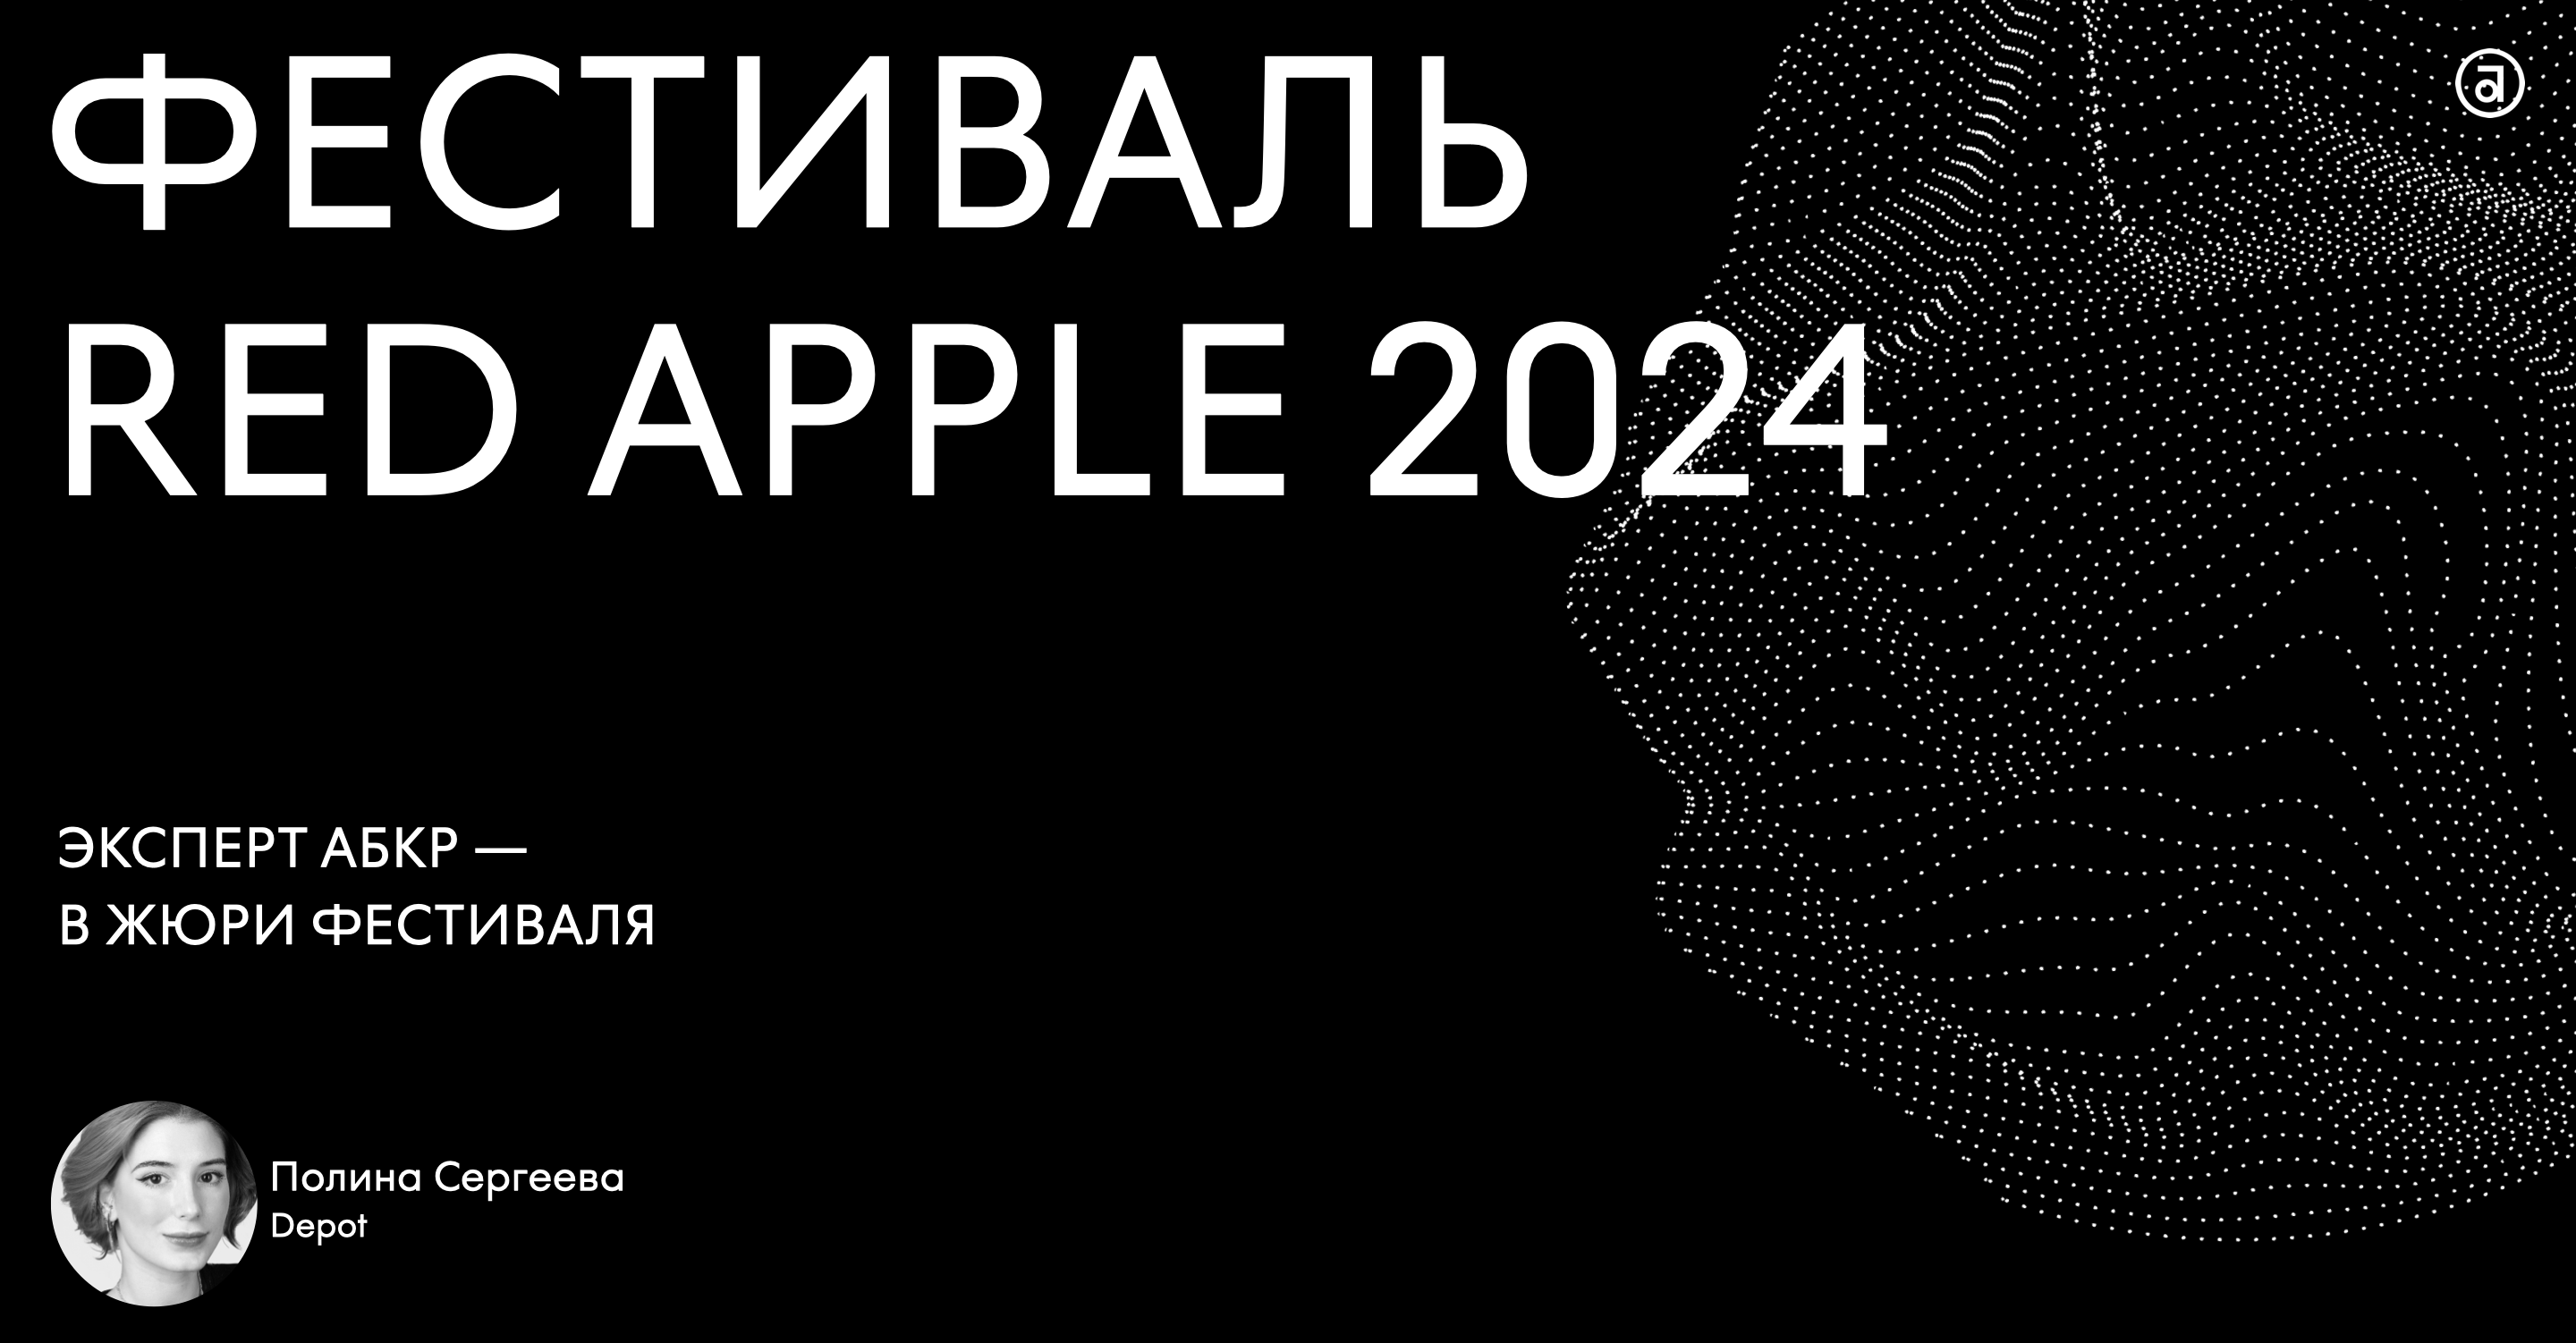       Red Apple 2024